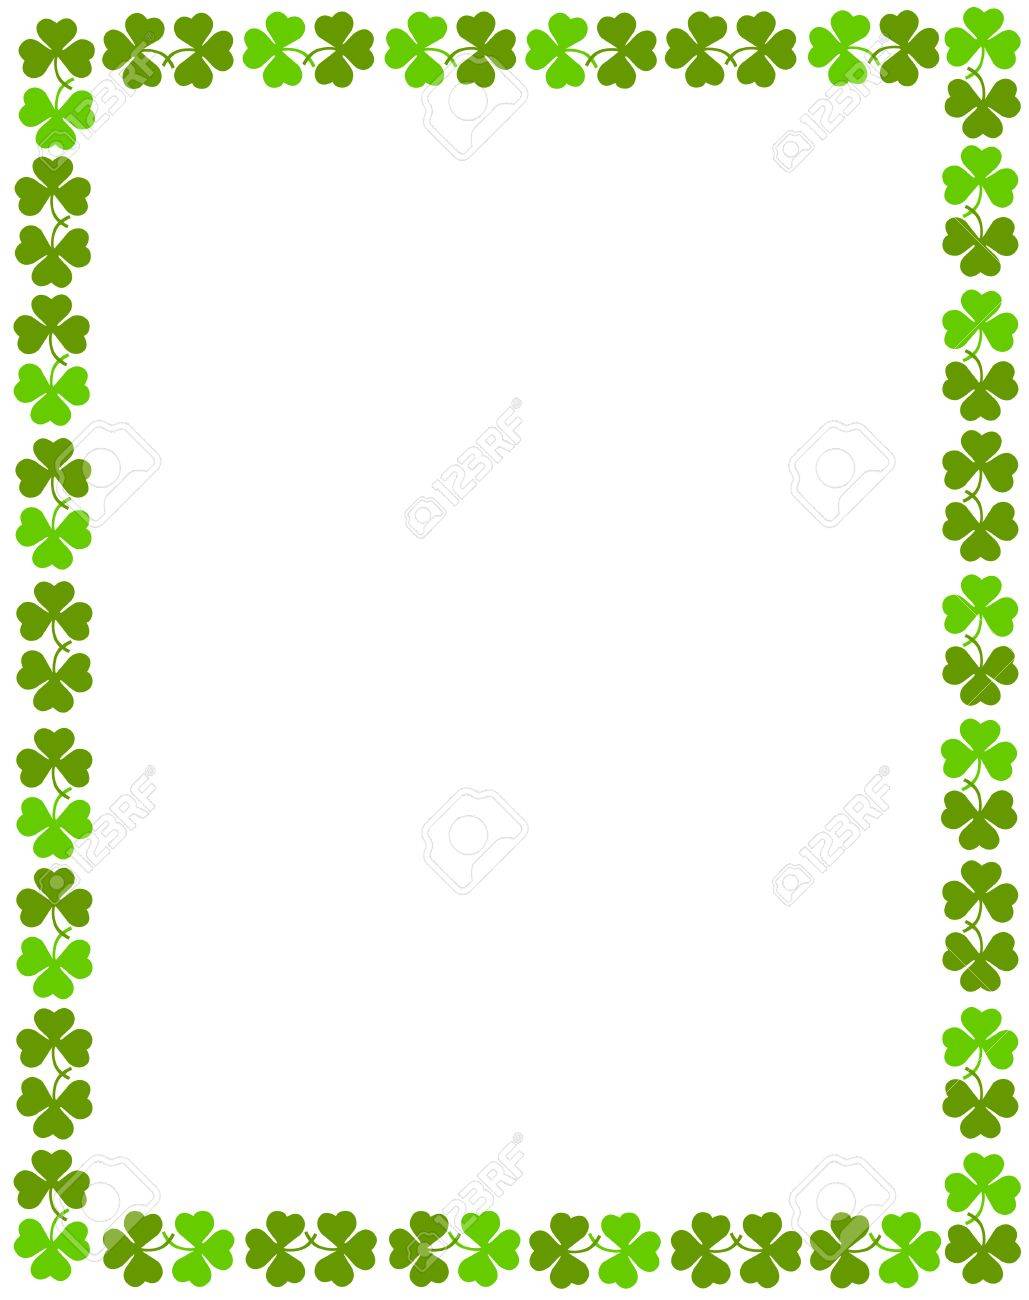 Download Free png Green Clover St. Patrick\'s Day Background.